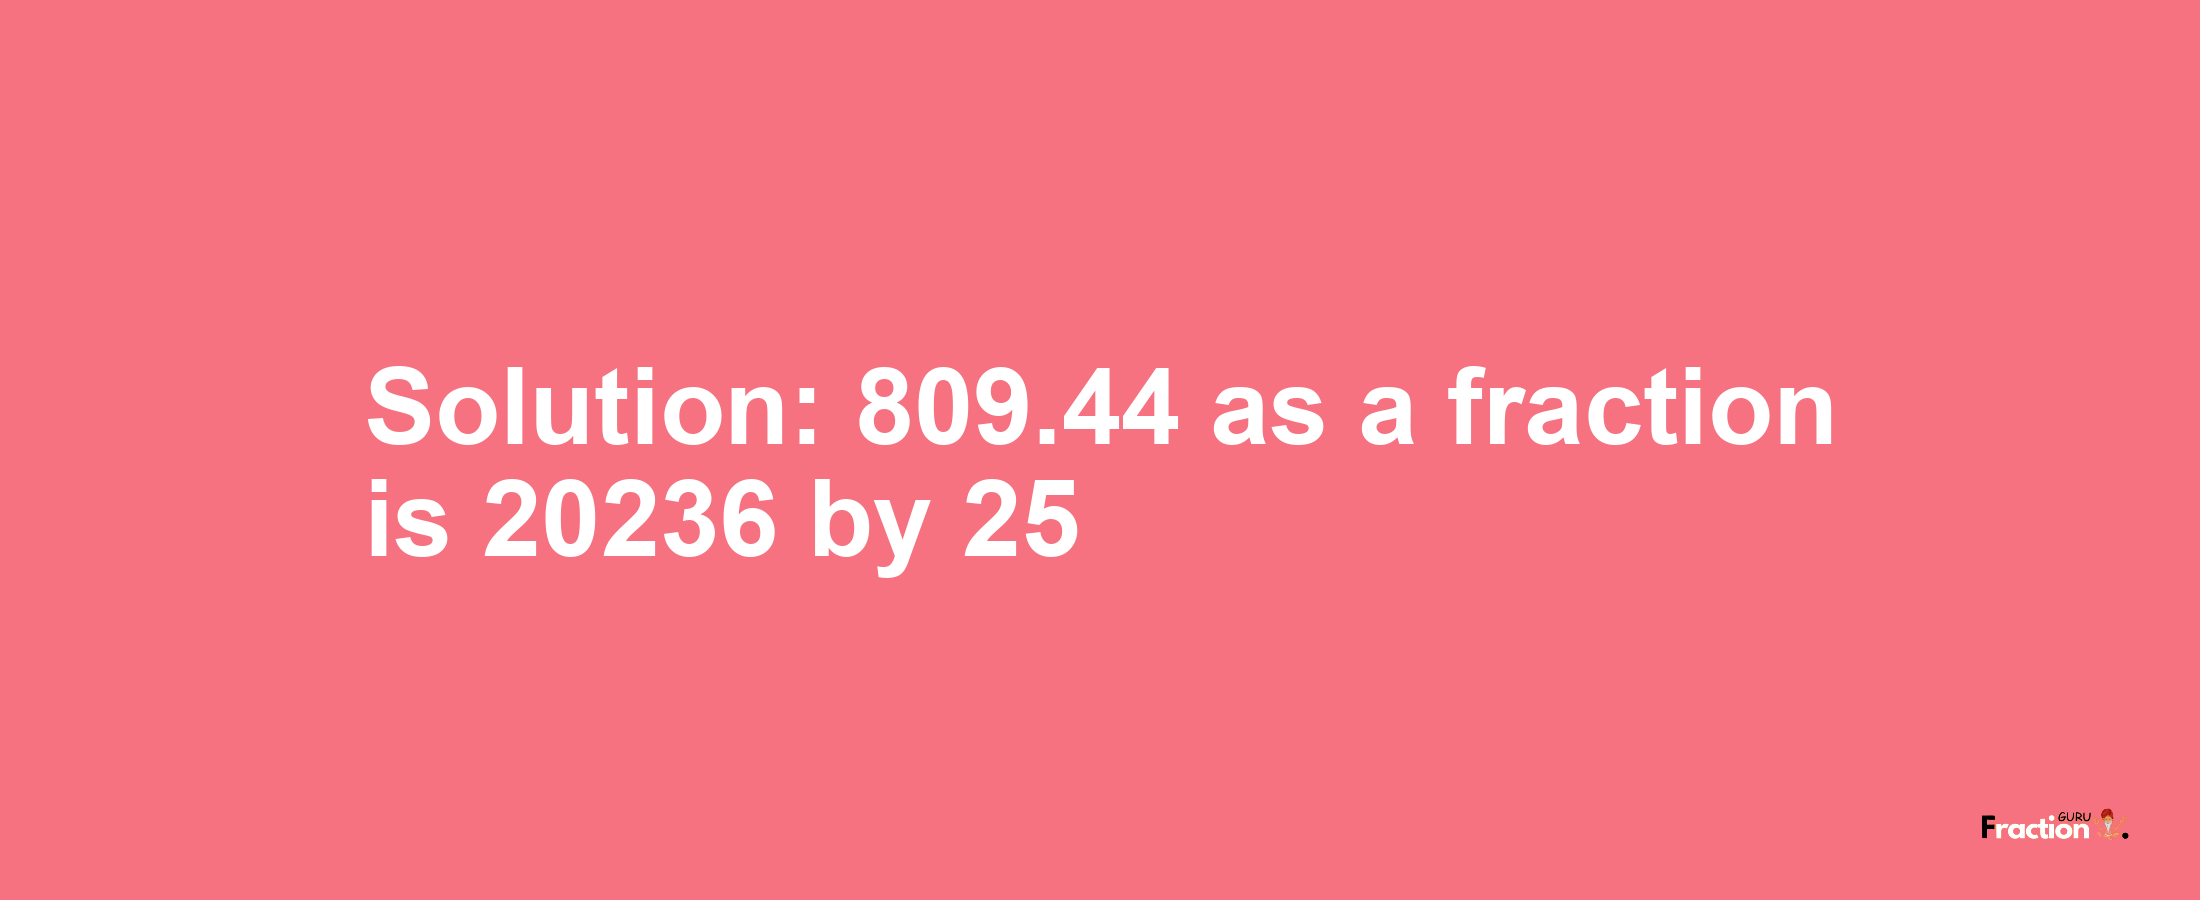 Solution:809.44 as a fraction is 20236/25